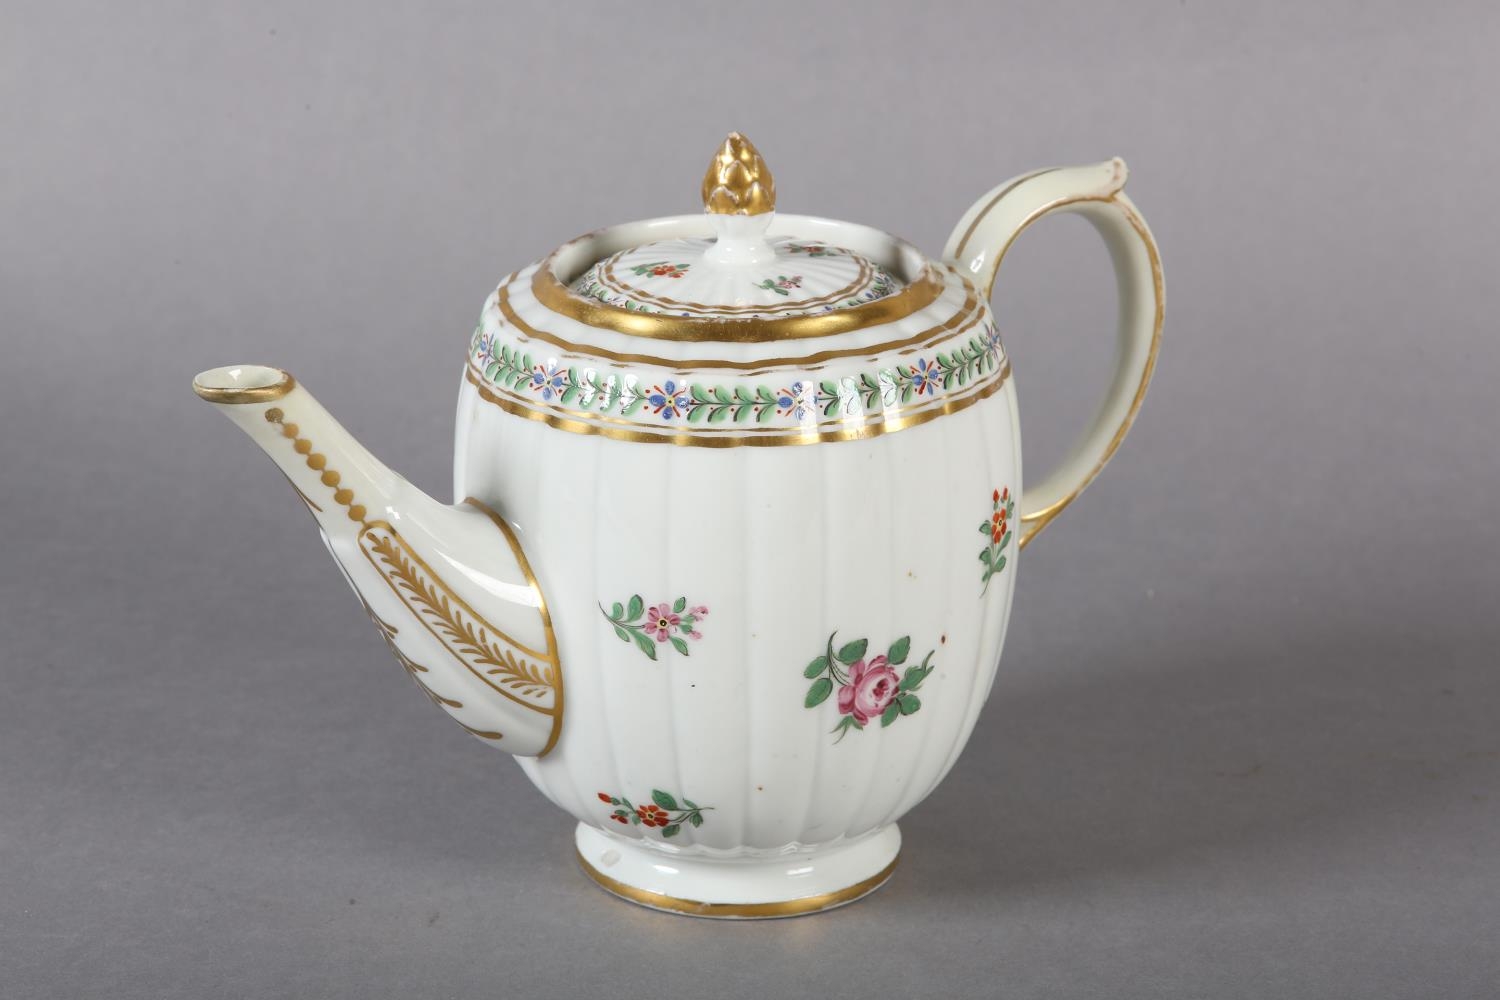 An 18th century teapot, the lid having an acorn gilt finial, the fluted body of barrel shape painted - Image 7 of 9